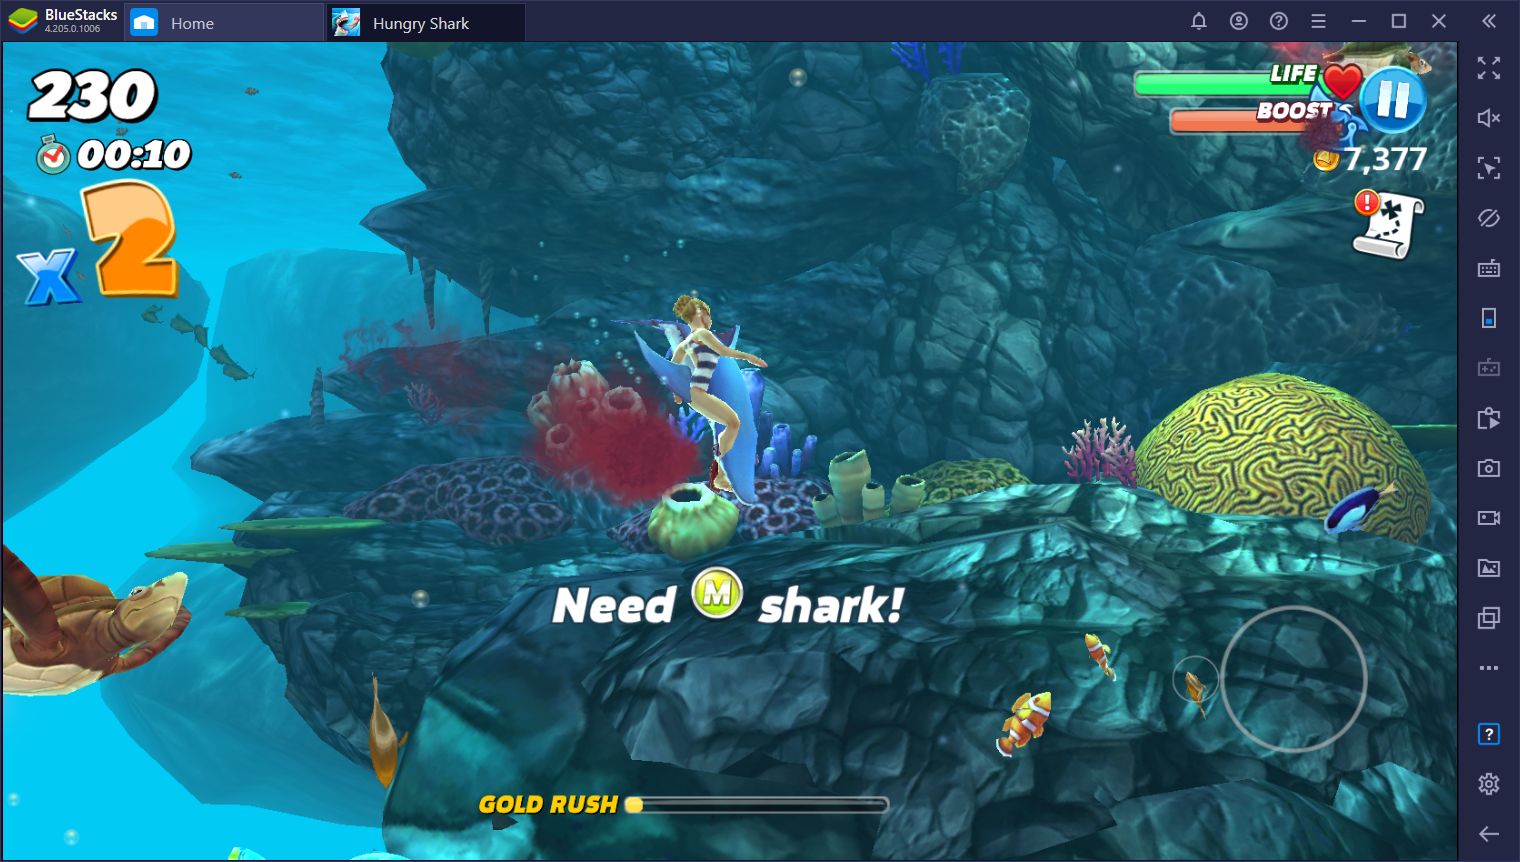 Everything you need to know about playing Hungry Shark World on PC with  BlueStacks